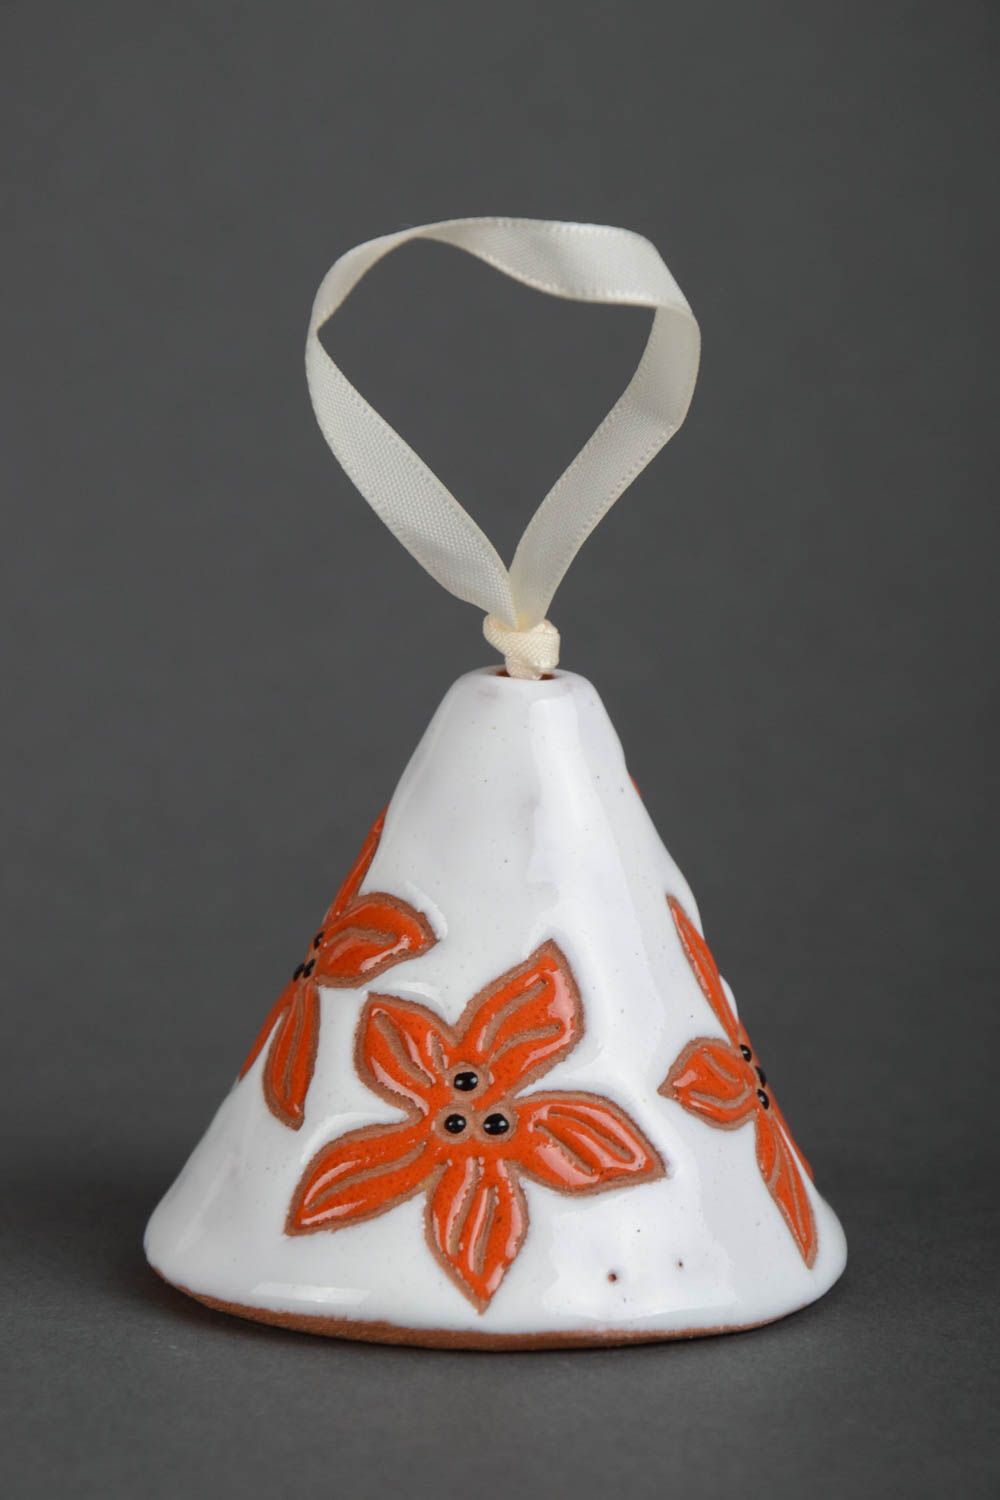 Handmade small ceramic white and orange decorative hanging bell with flowers photo 2